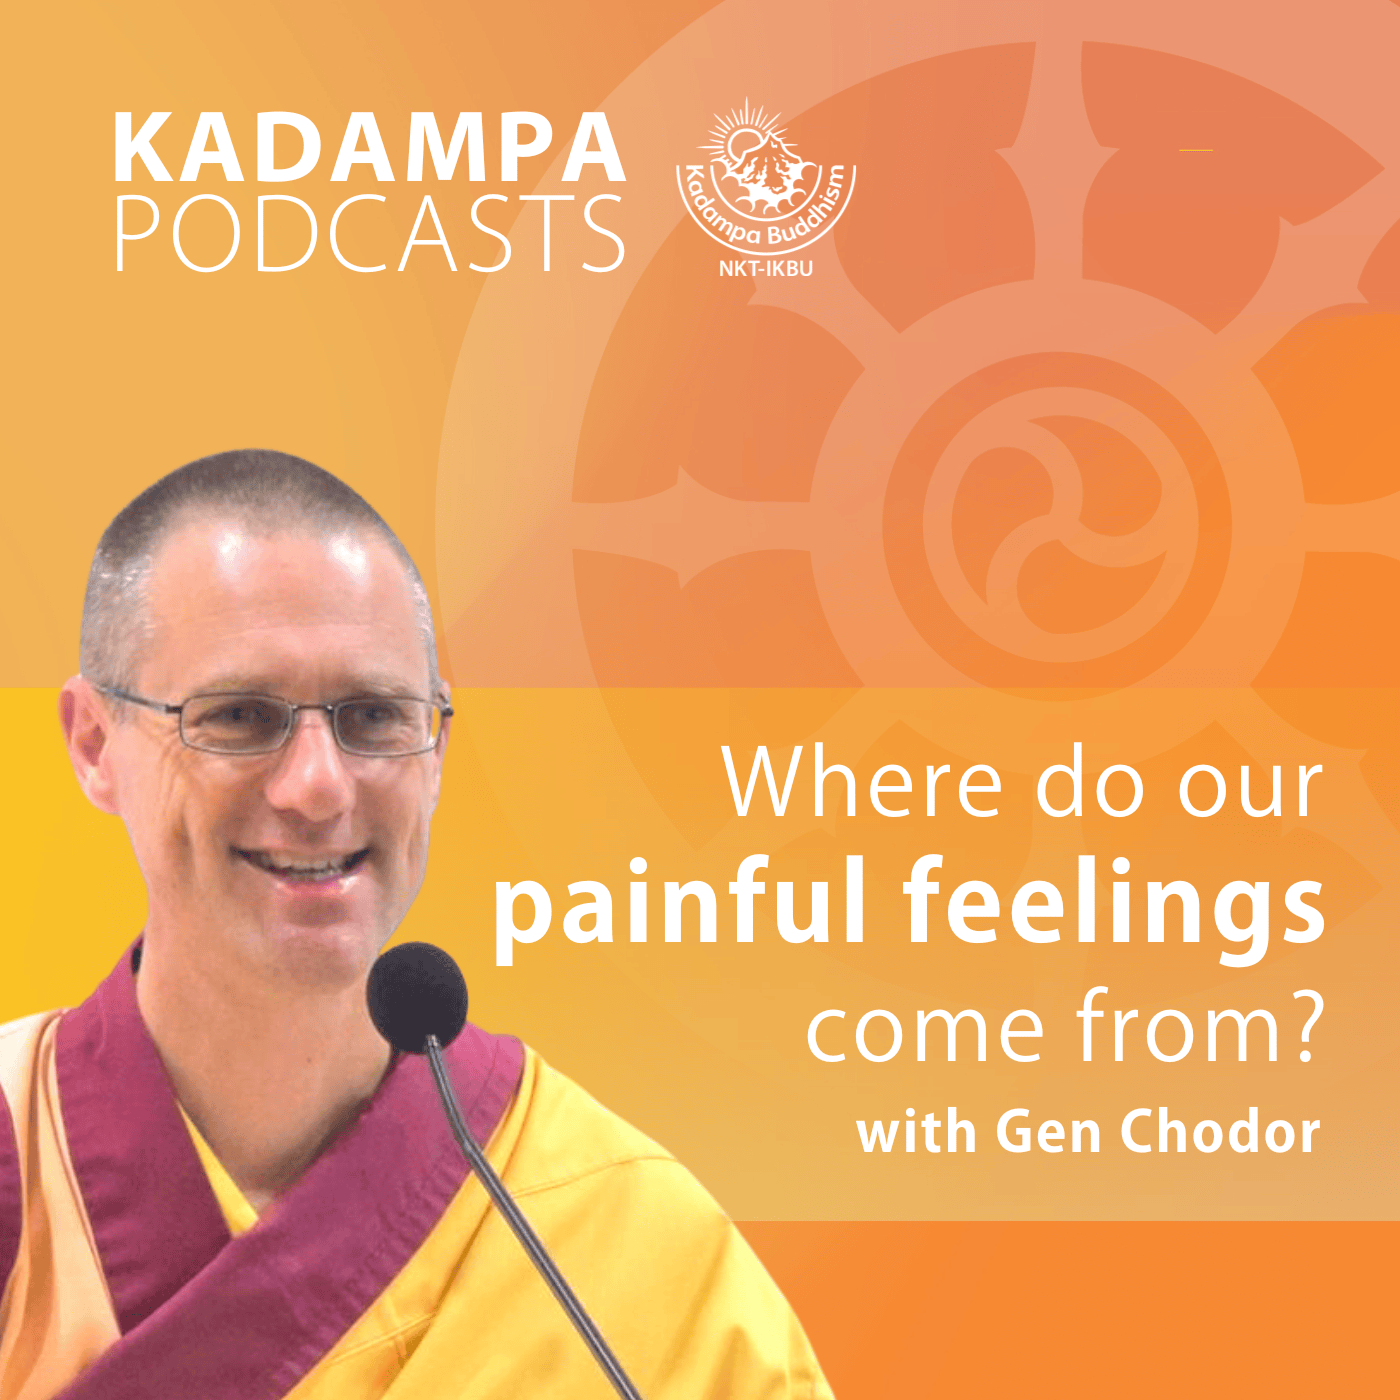 Where do our painful feelings come from?